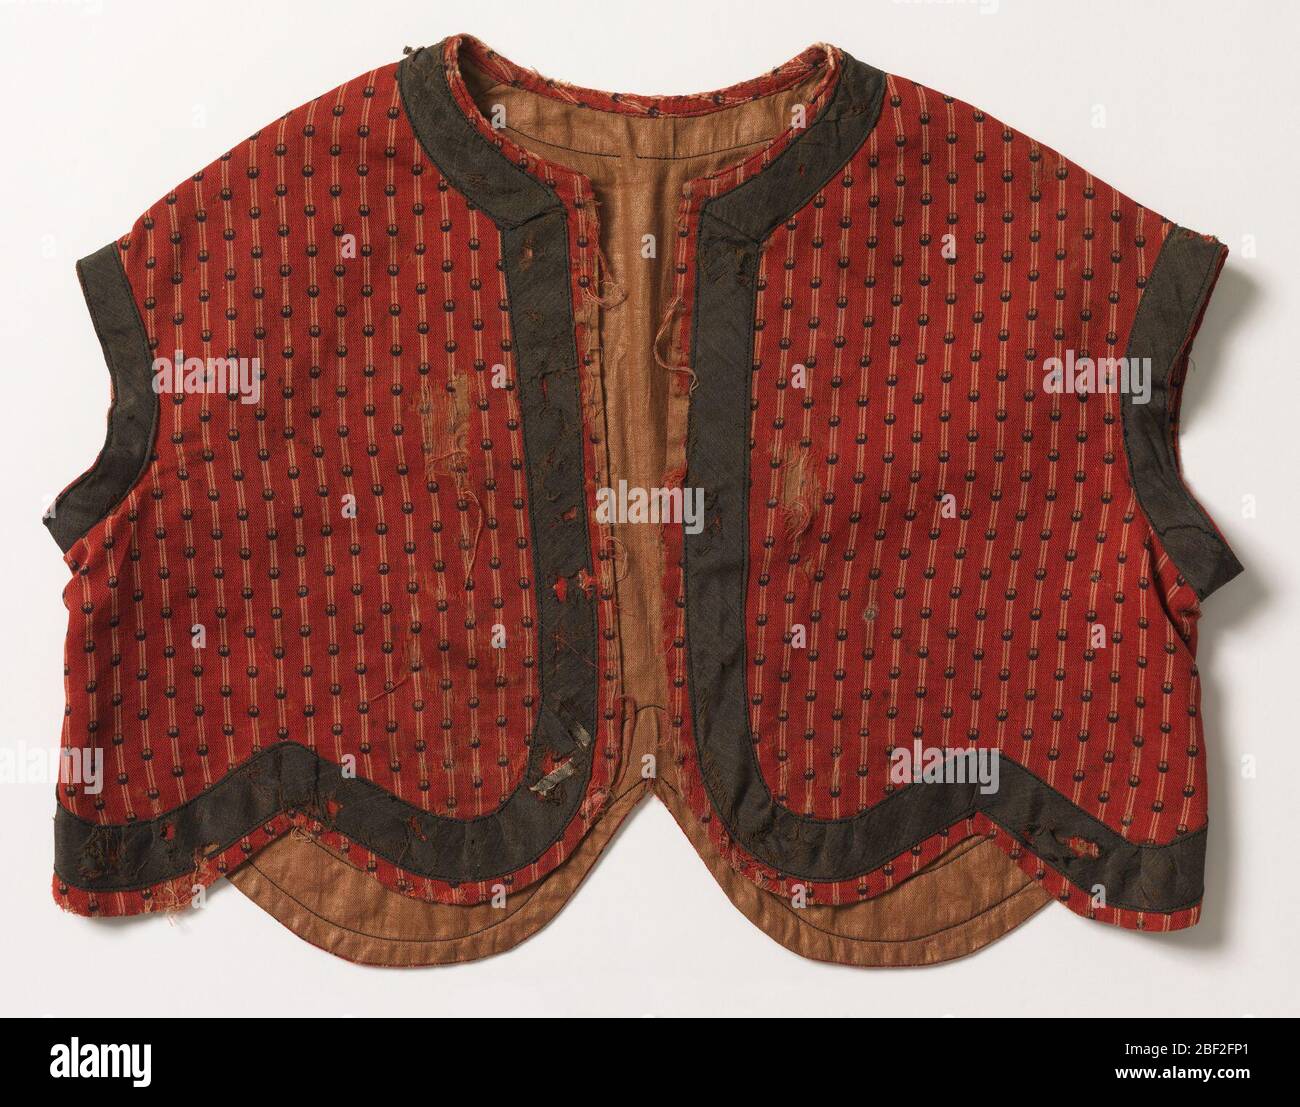 Vest. child's short jacket of red wool, striped in white and printed, over-stripe in small black dots. Roud neck, no sleeve, shaped, scalloped bottom. Trimmed with band of black wool around neck, arm hole and bottom, light brown glazed cotton lining. Machine sewn. Stock Photo